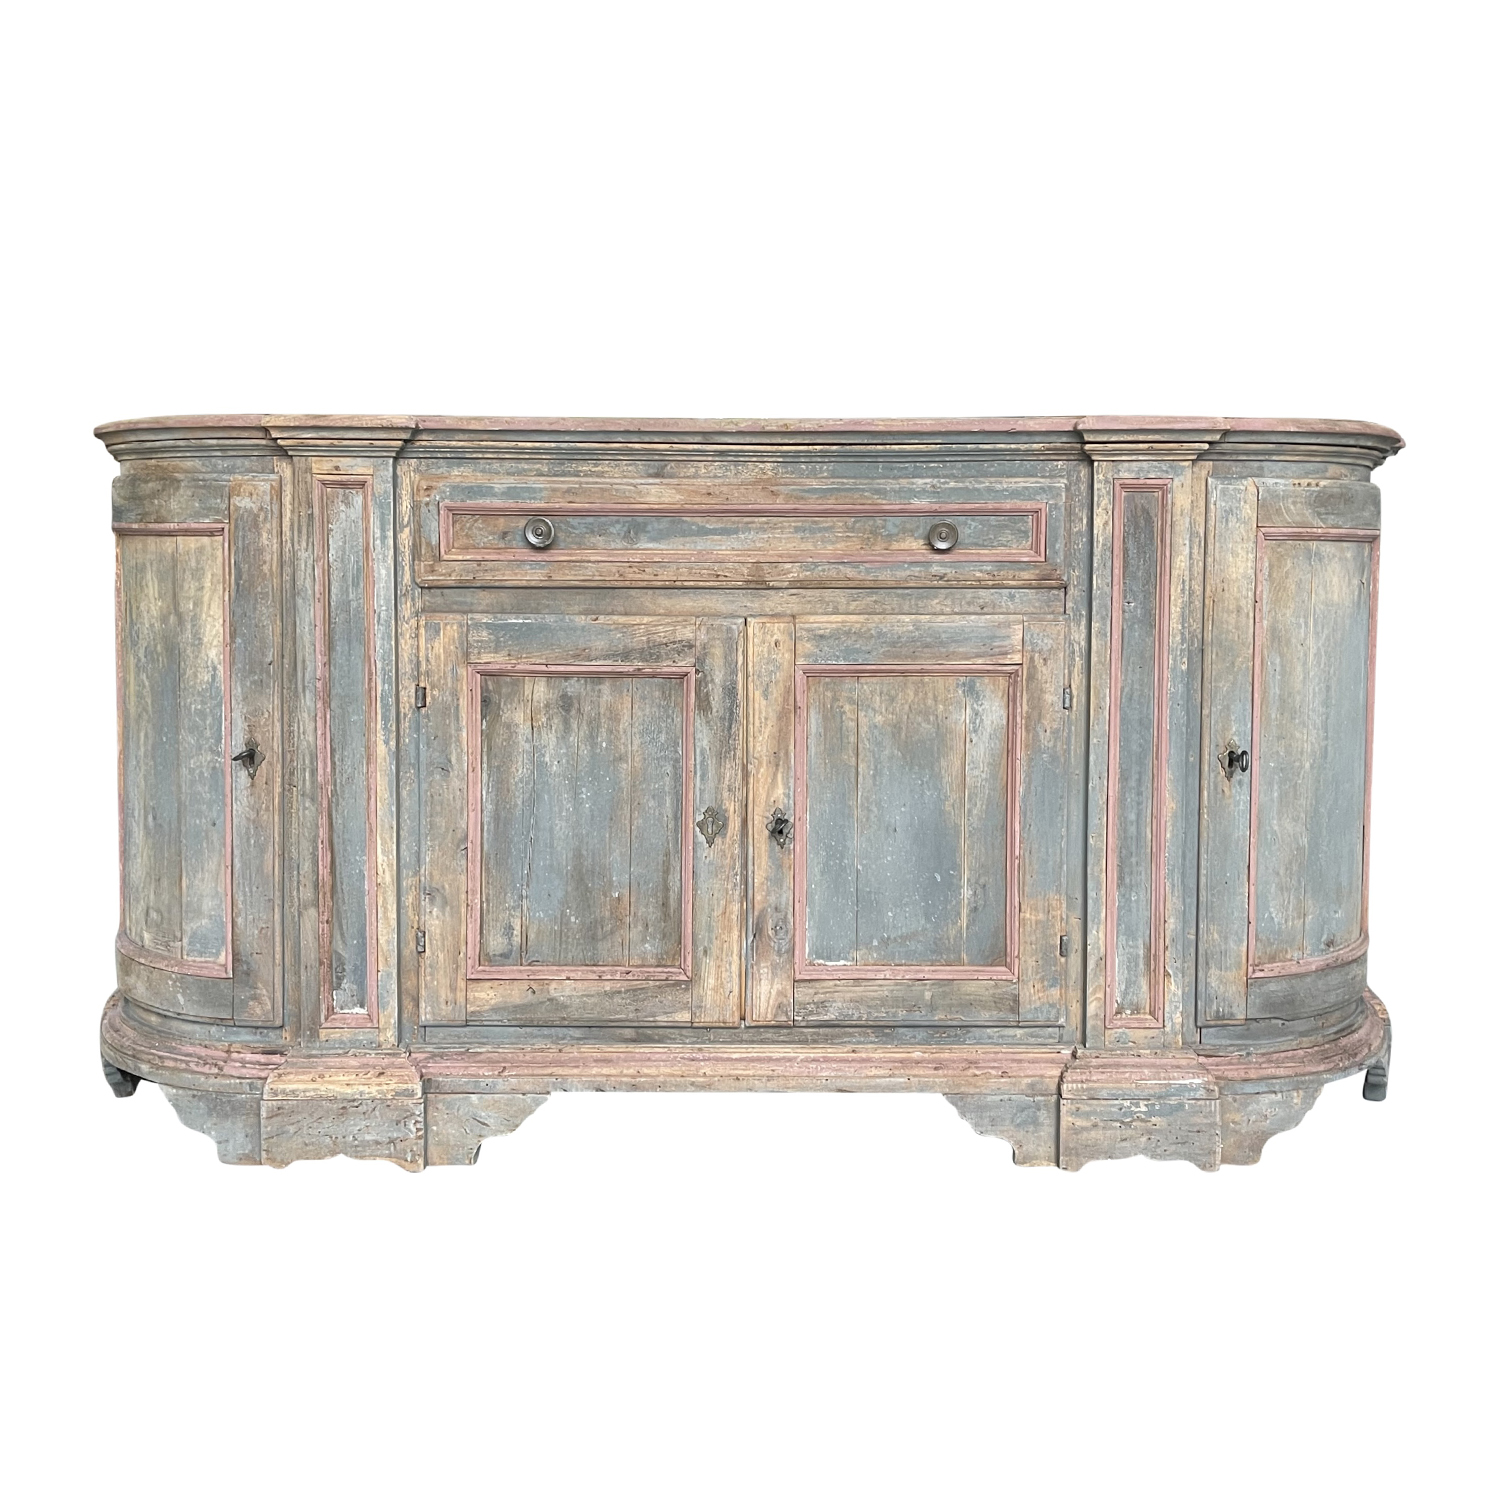 18th Century French Provencal Pinewood Cabinet – Antique Demi-Lune Sideboard